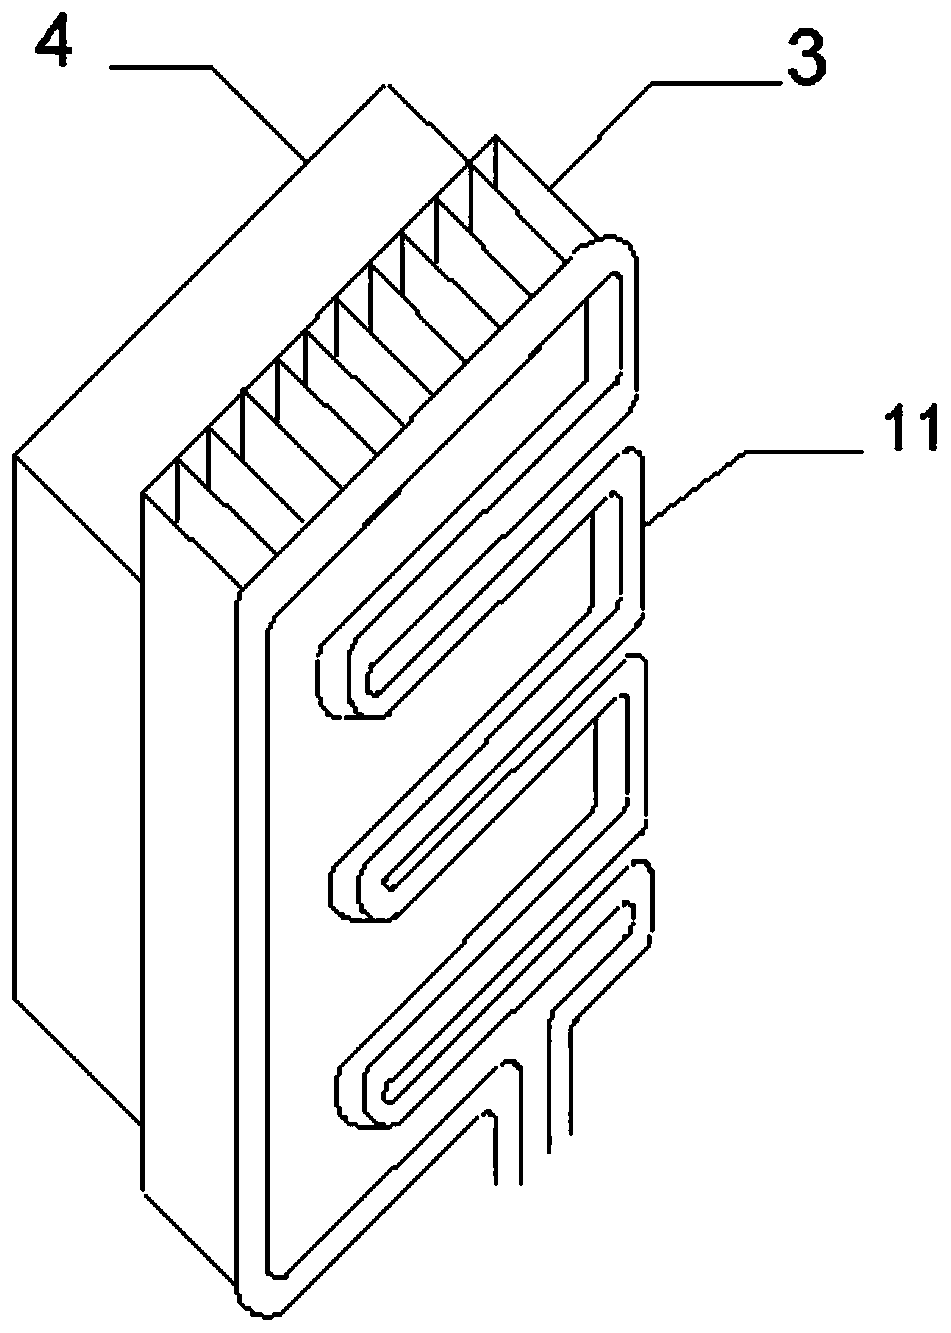 Liquid-cooling heat dissipation device for smart phone